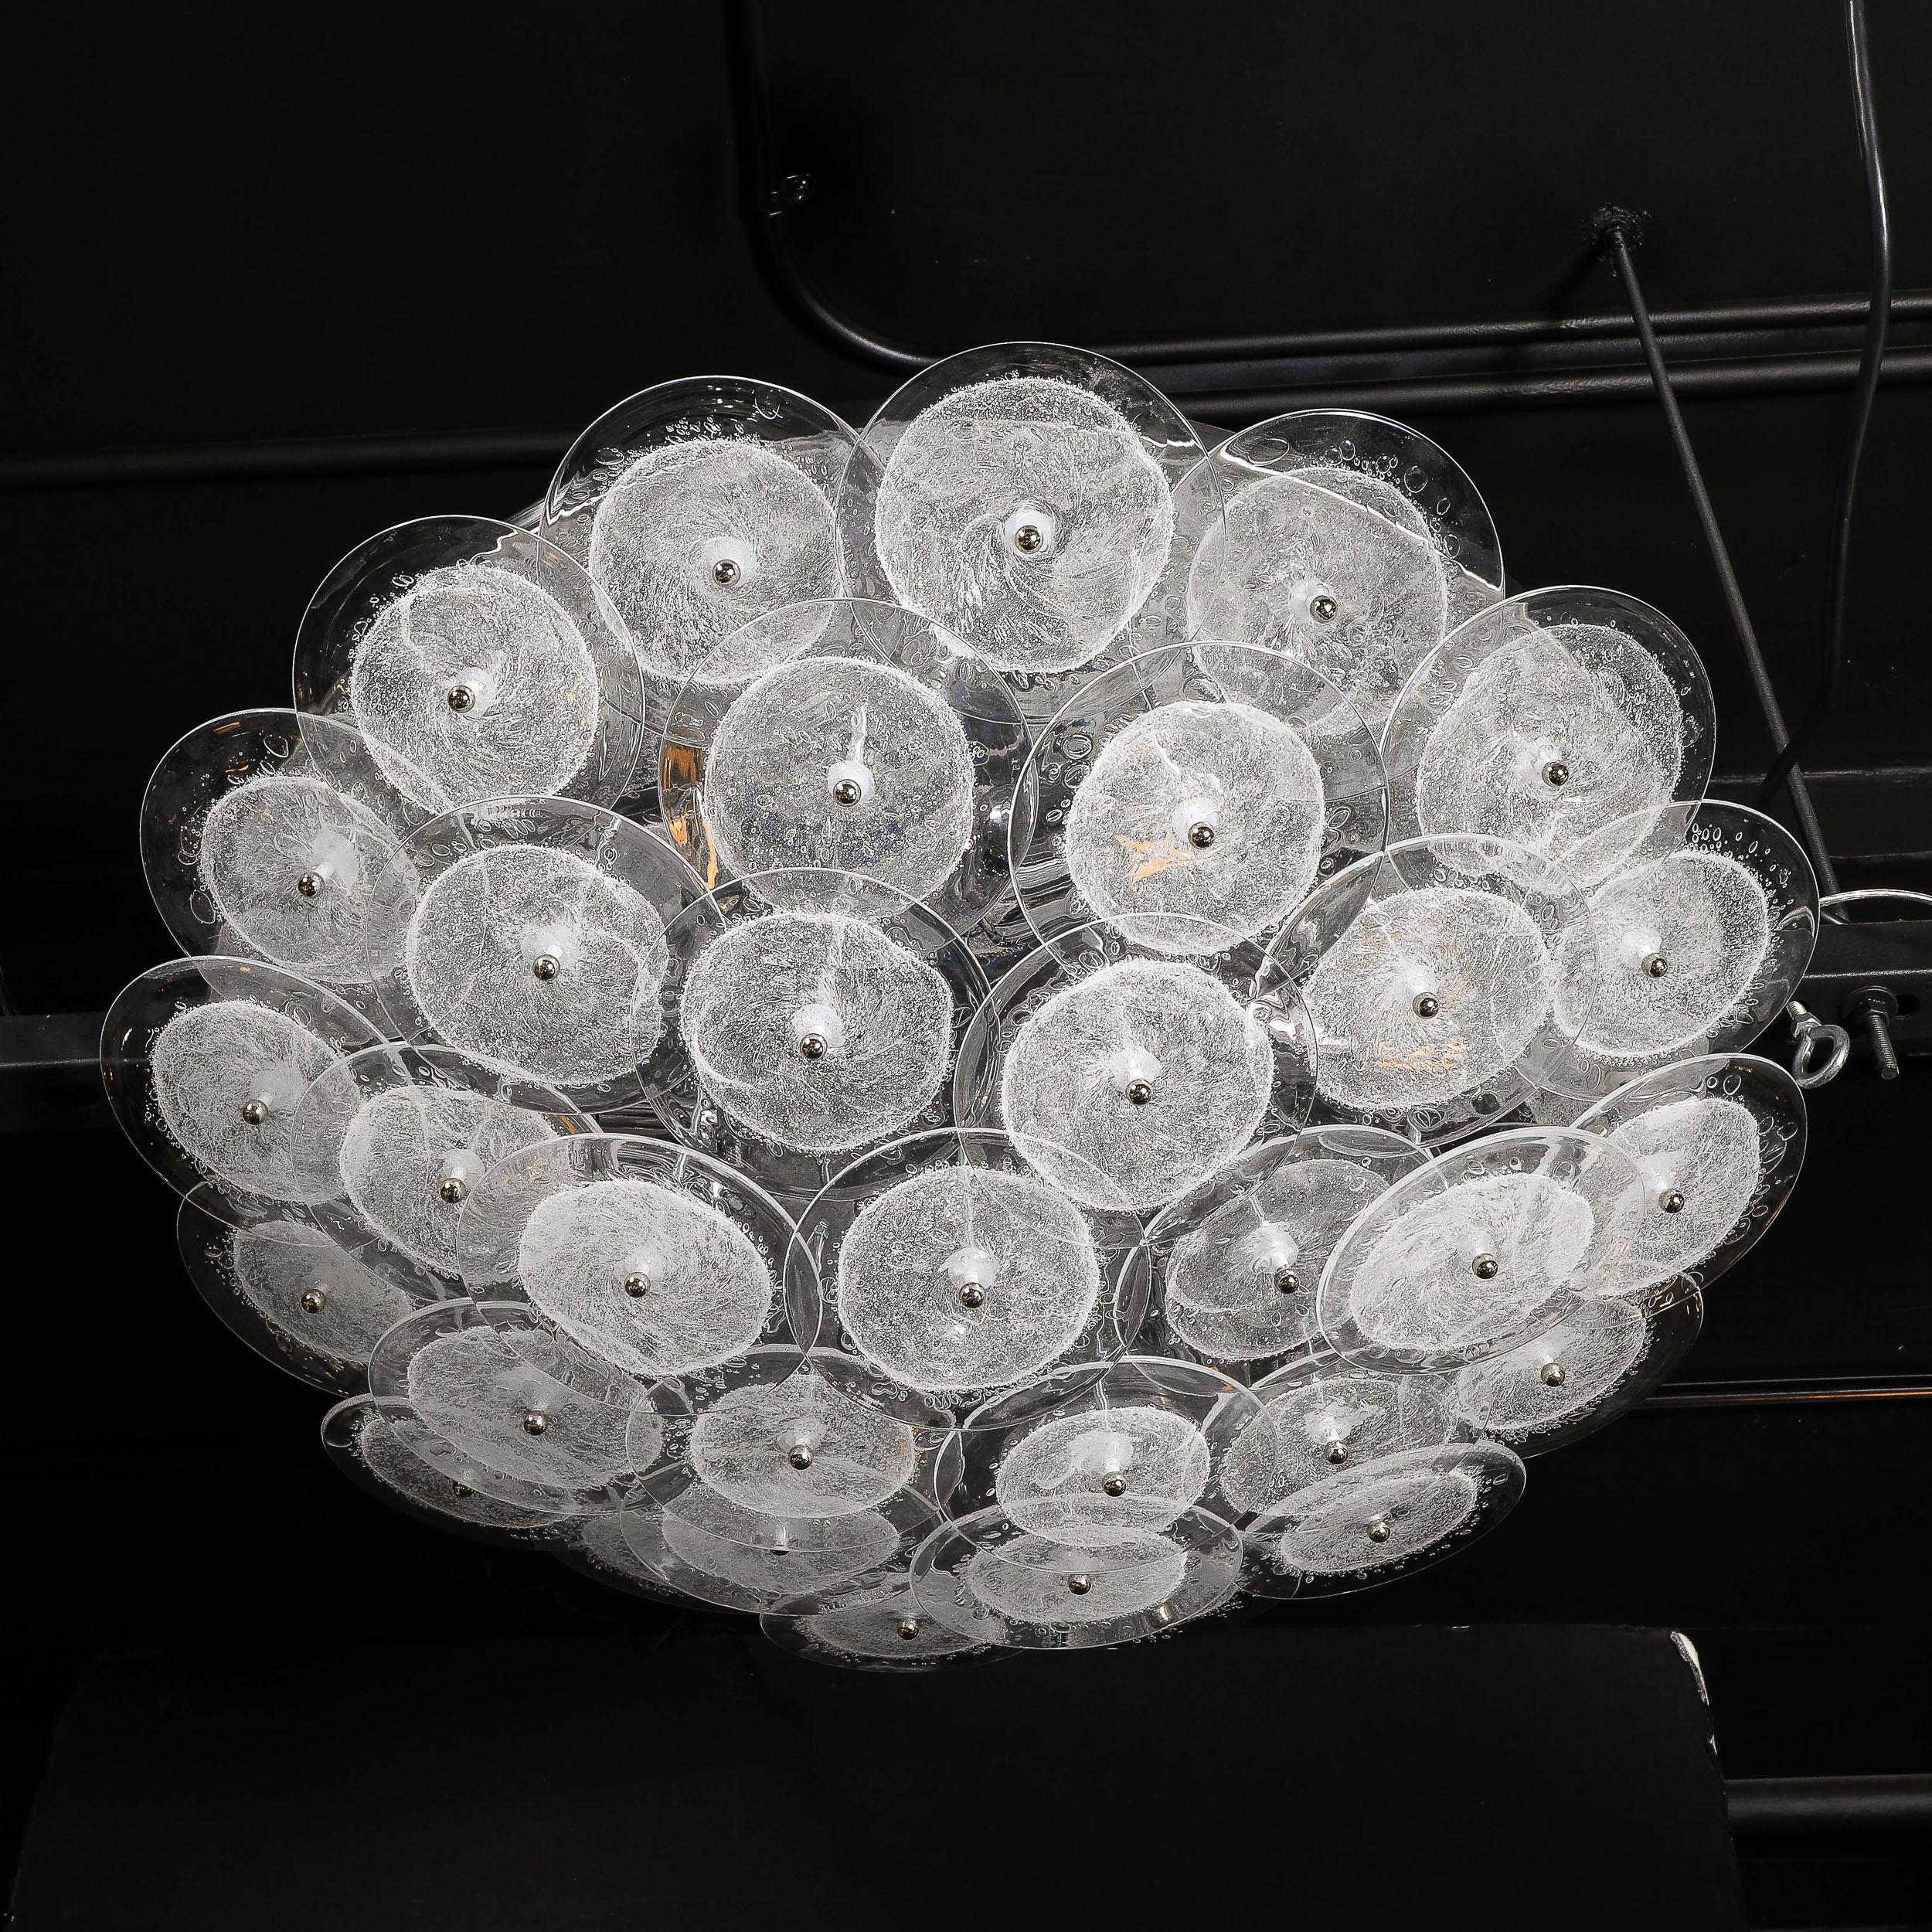 Flush mount chandelier with handblown Murano clear glass discs in the Manner of Vistosi. This flush mount chandelier consists of an array of numerous, individually attached handblown Murano clear glass discs that each incorporate a central bubbled